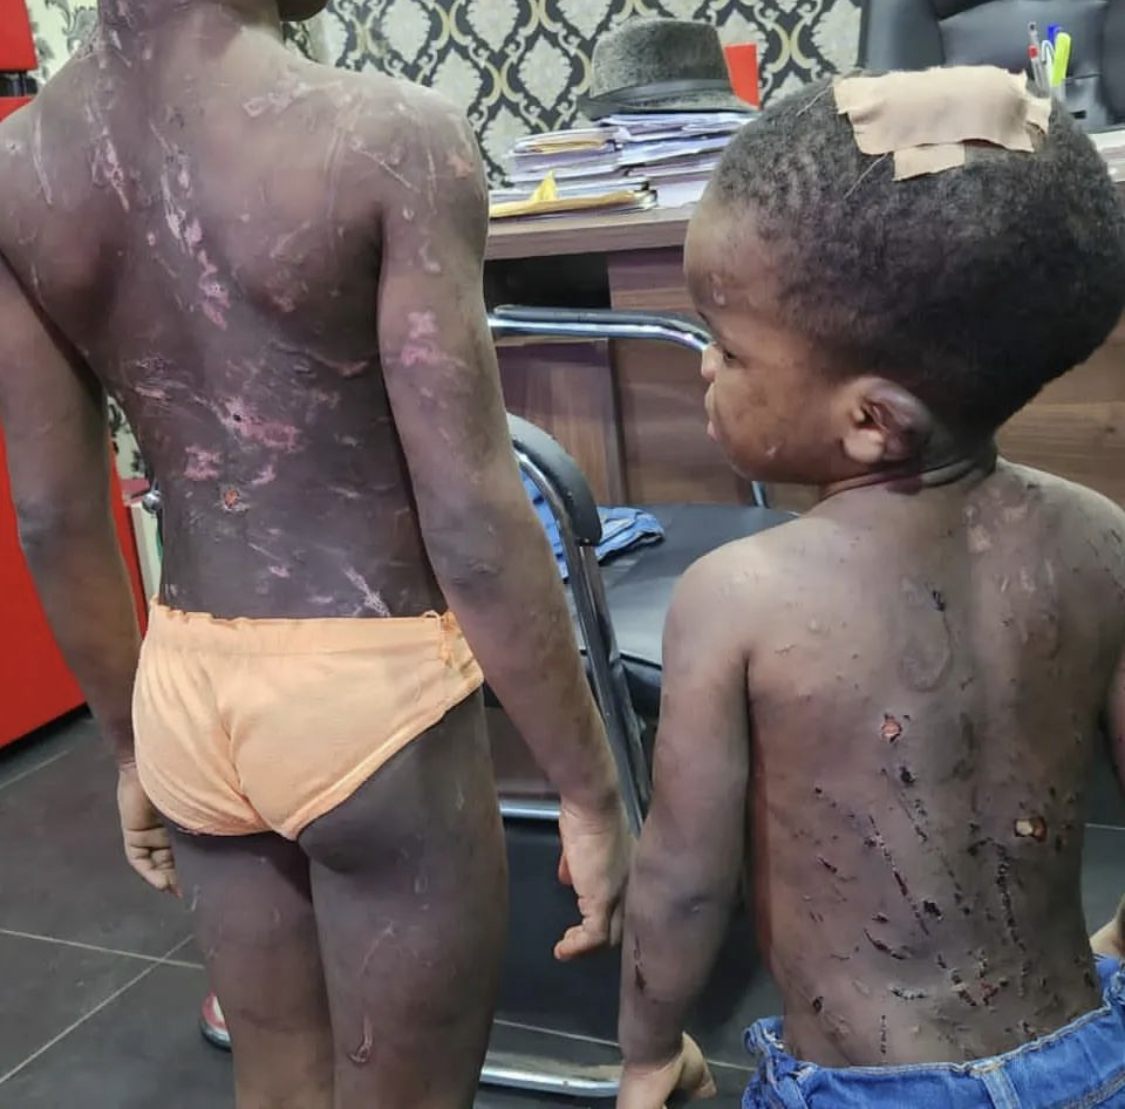 Police arrest Couple for brutalizing 5 and 2 year old children [photos]